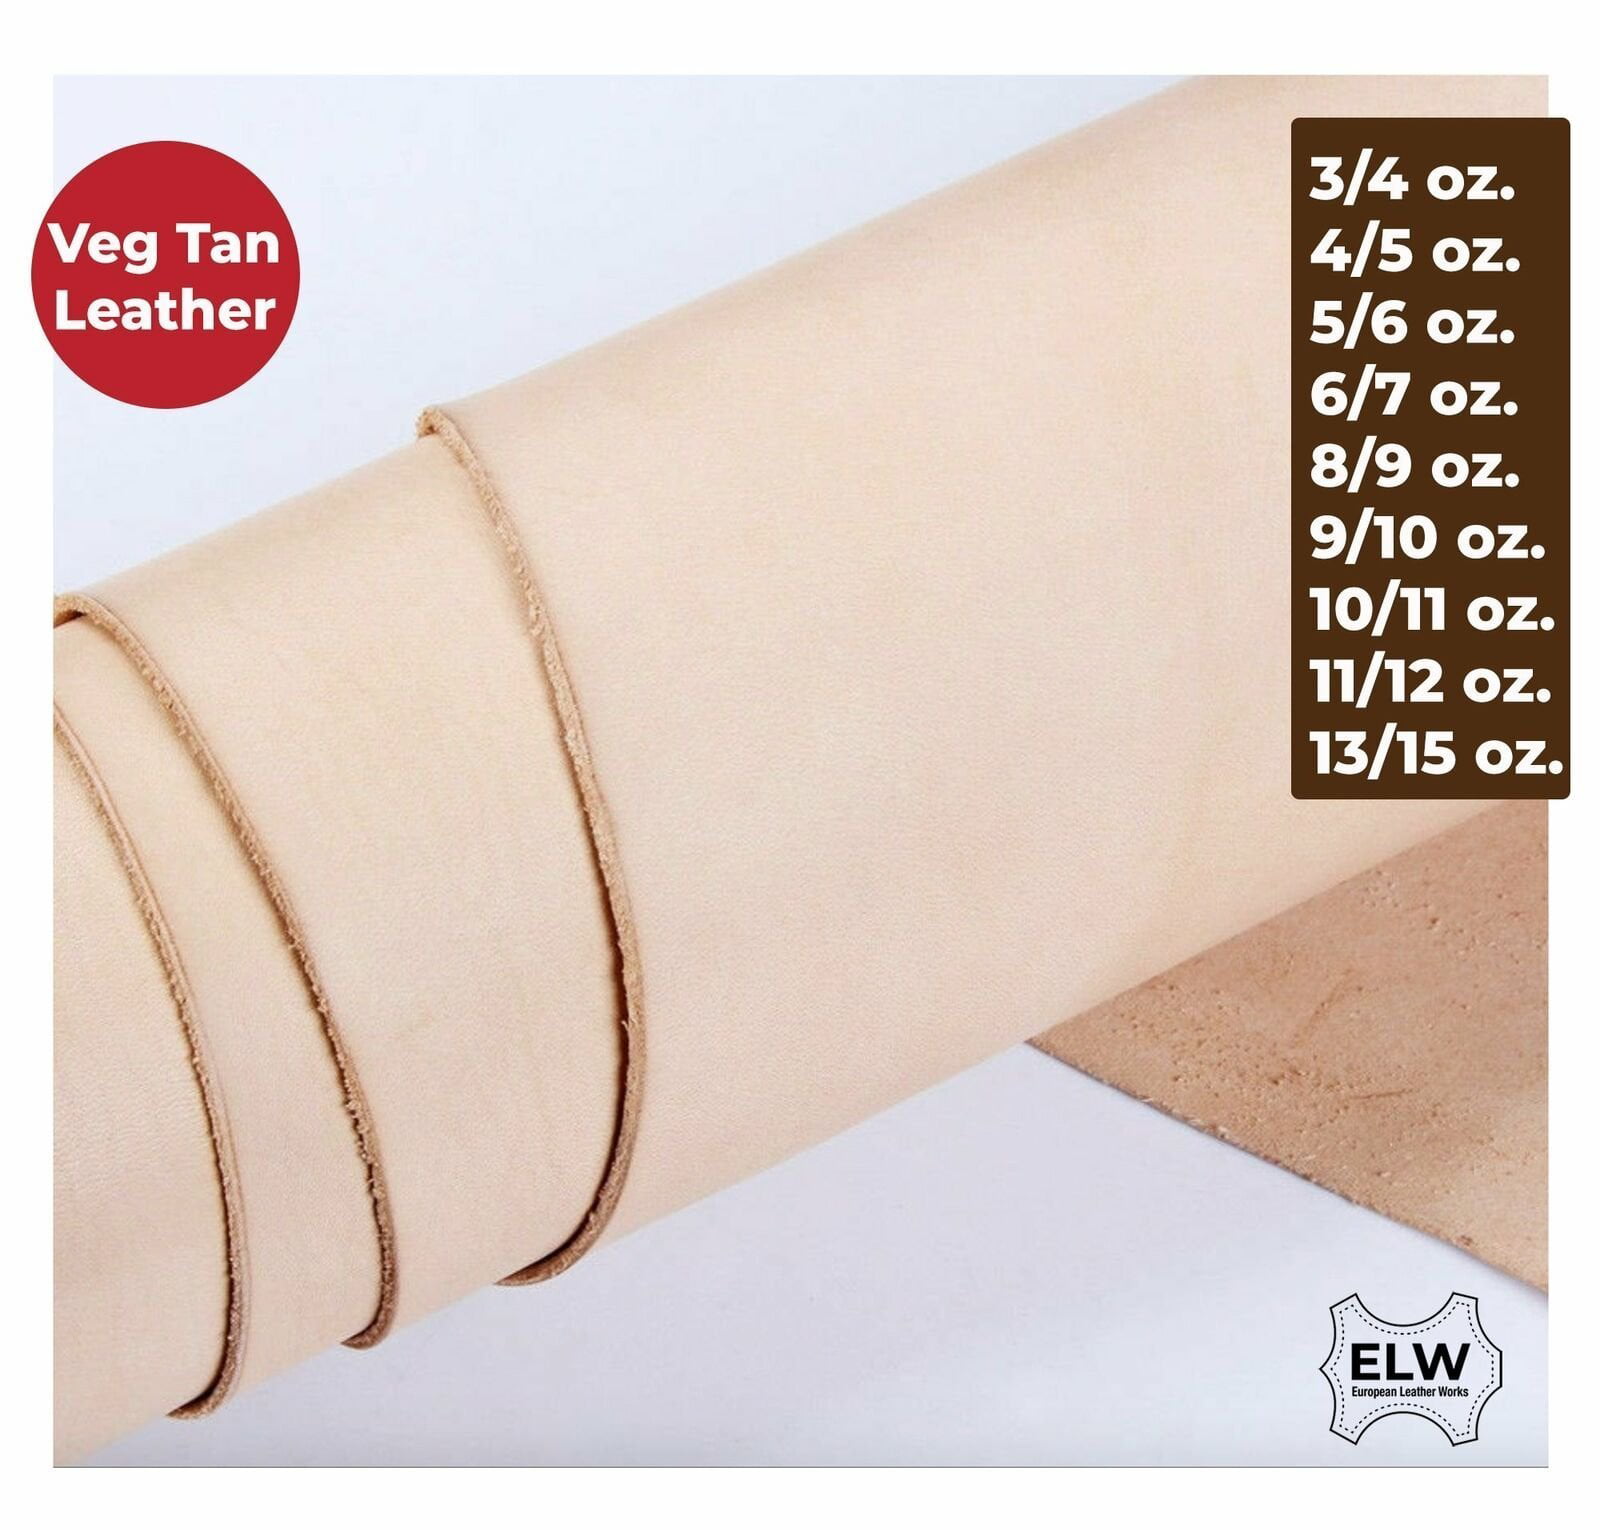 MD/zon Vegetable Tanned Leather 5-6oz 2mm Thickness Sizes 1/2"to 4"W X 52" Long 